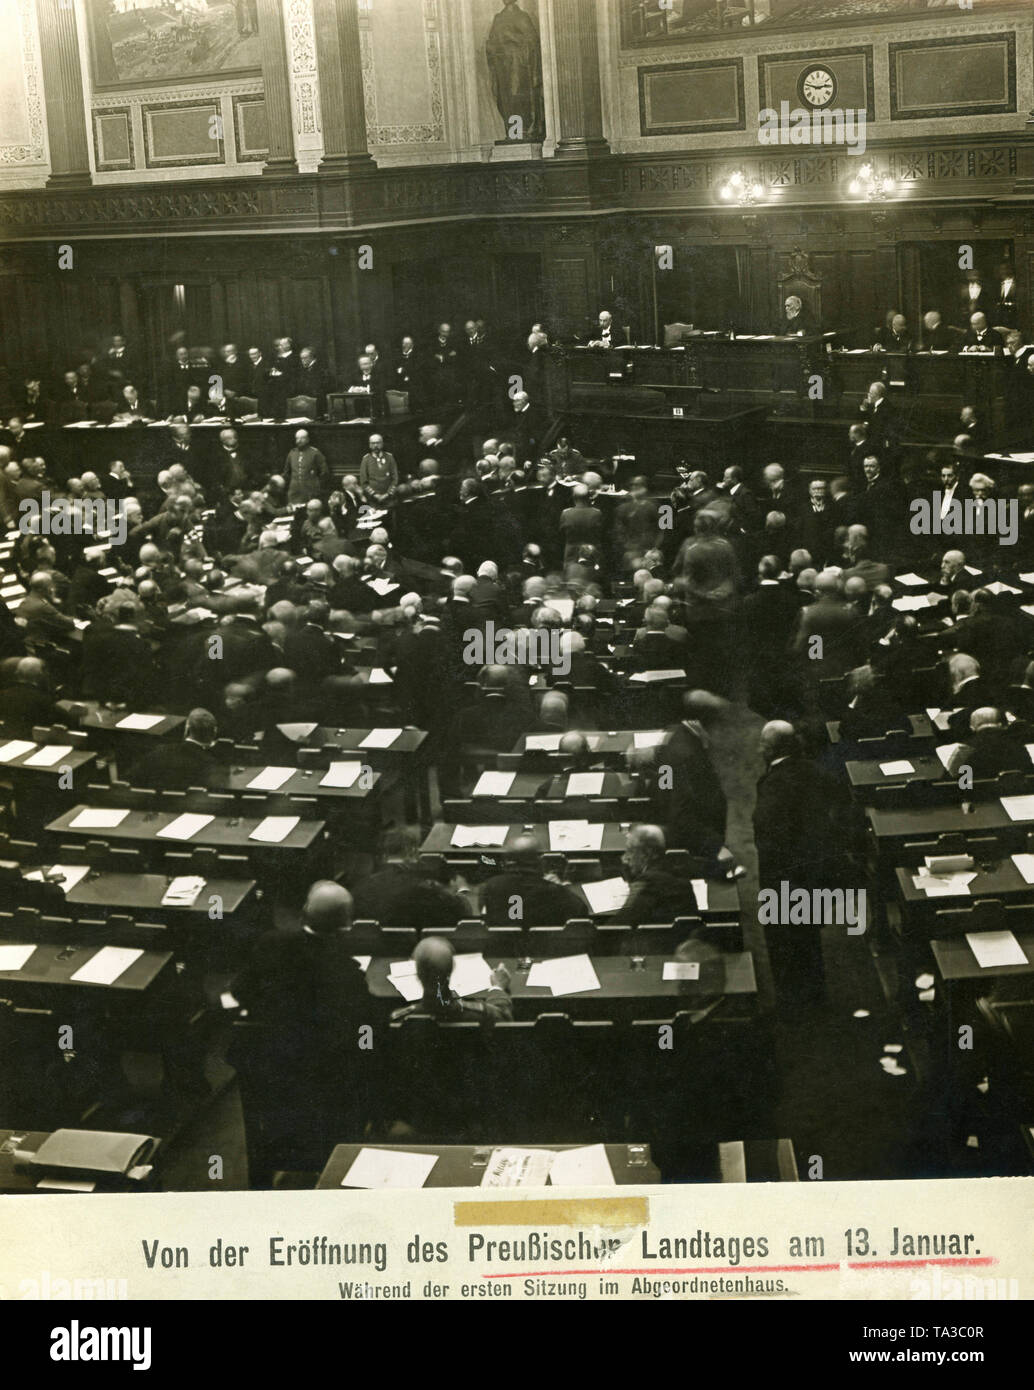 After the elections in December 1924, the new Prussian Landtag (2nd legislative period) was opened in January 1925. Stock Photo